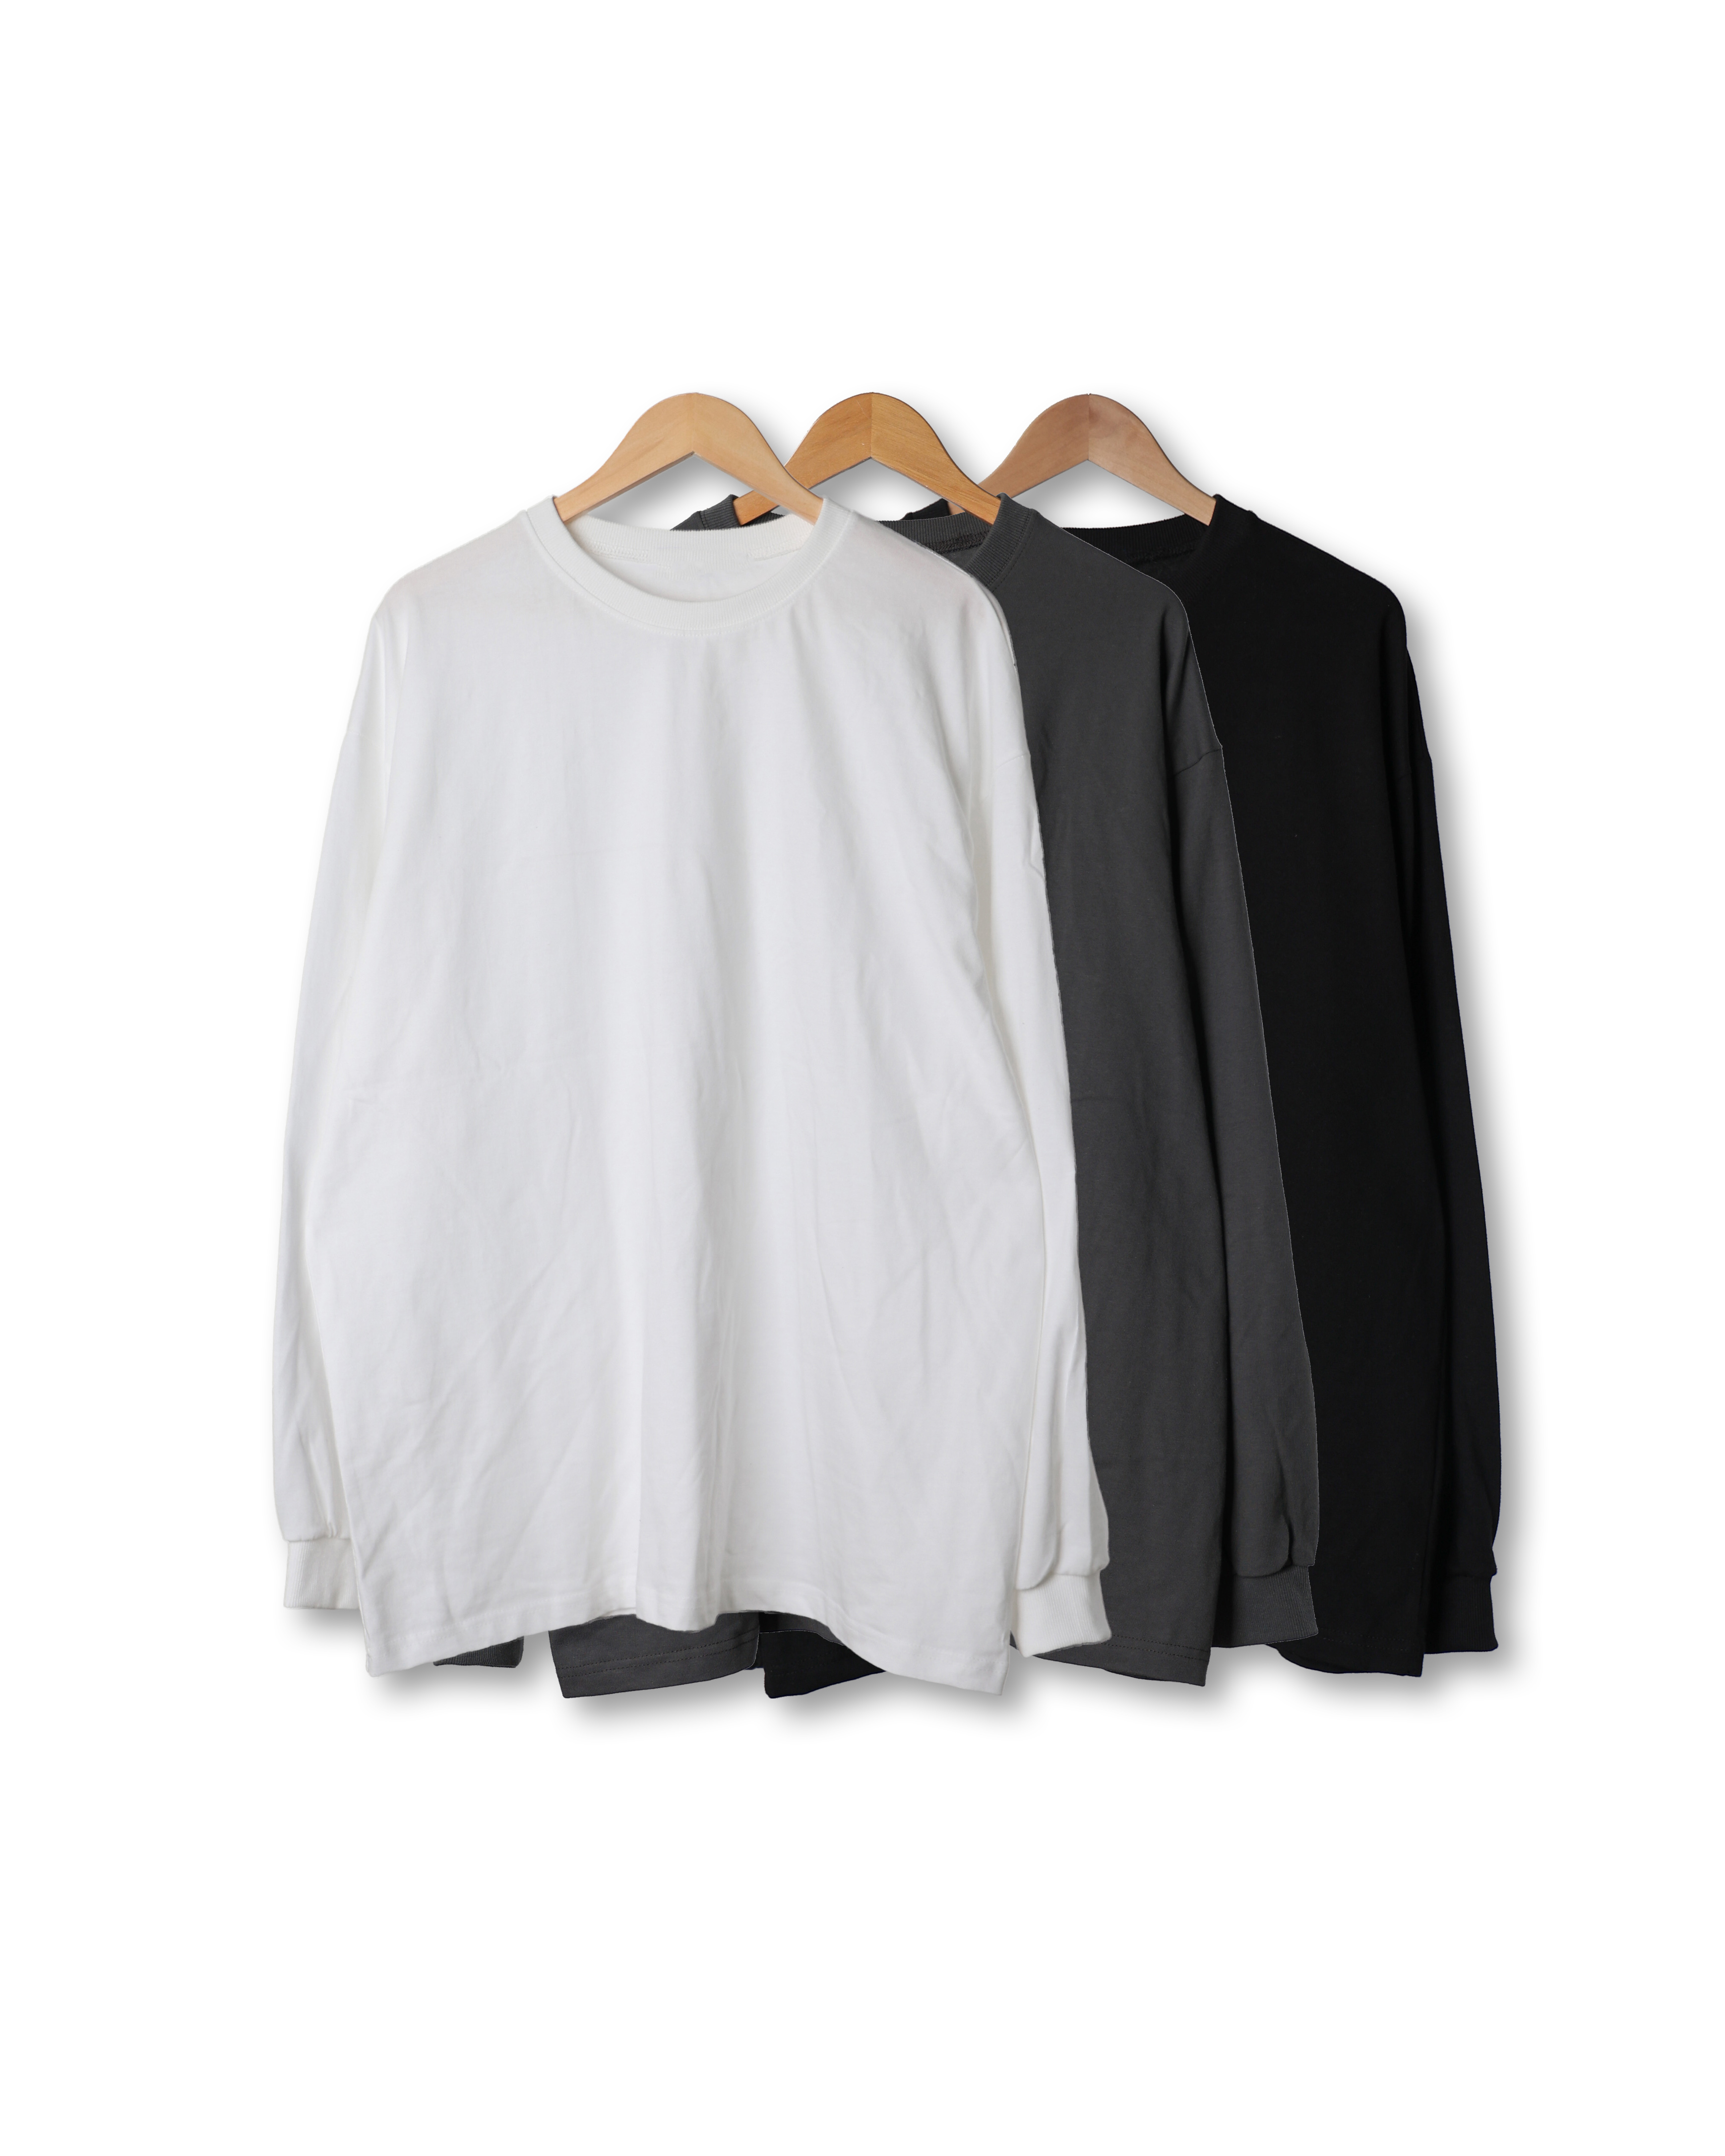 BECOLD Casual Easy Long Sleeve (Black/Charcoal/Ivory)